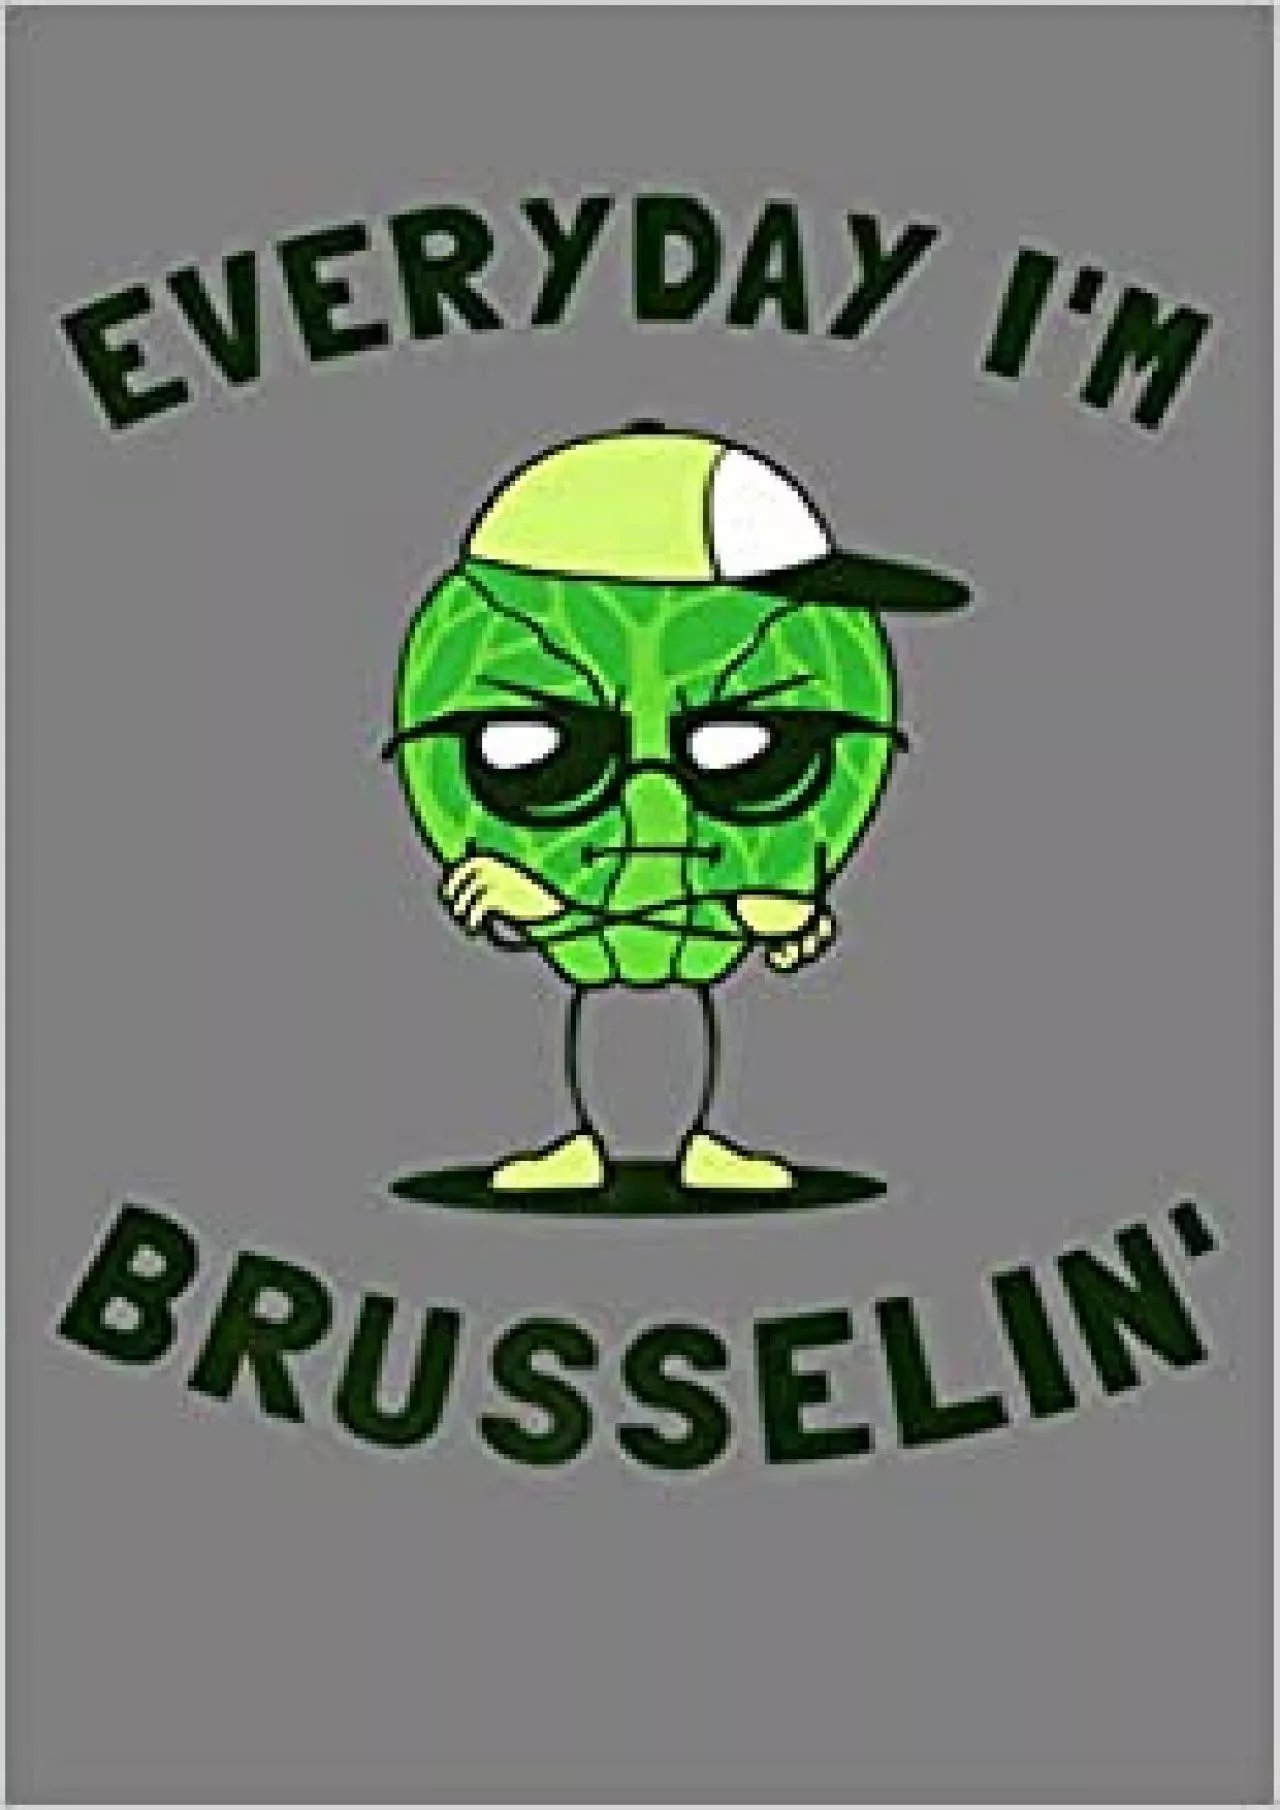 Brussel Sprouts Hustle Everyday I M Brusselin: Notebook Planner - 6x9 inch Daily Planner